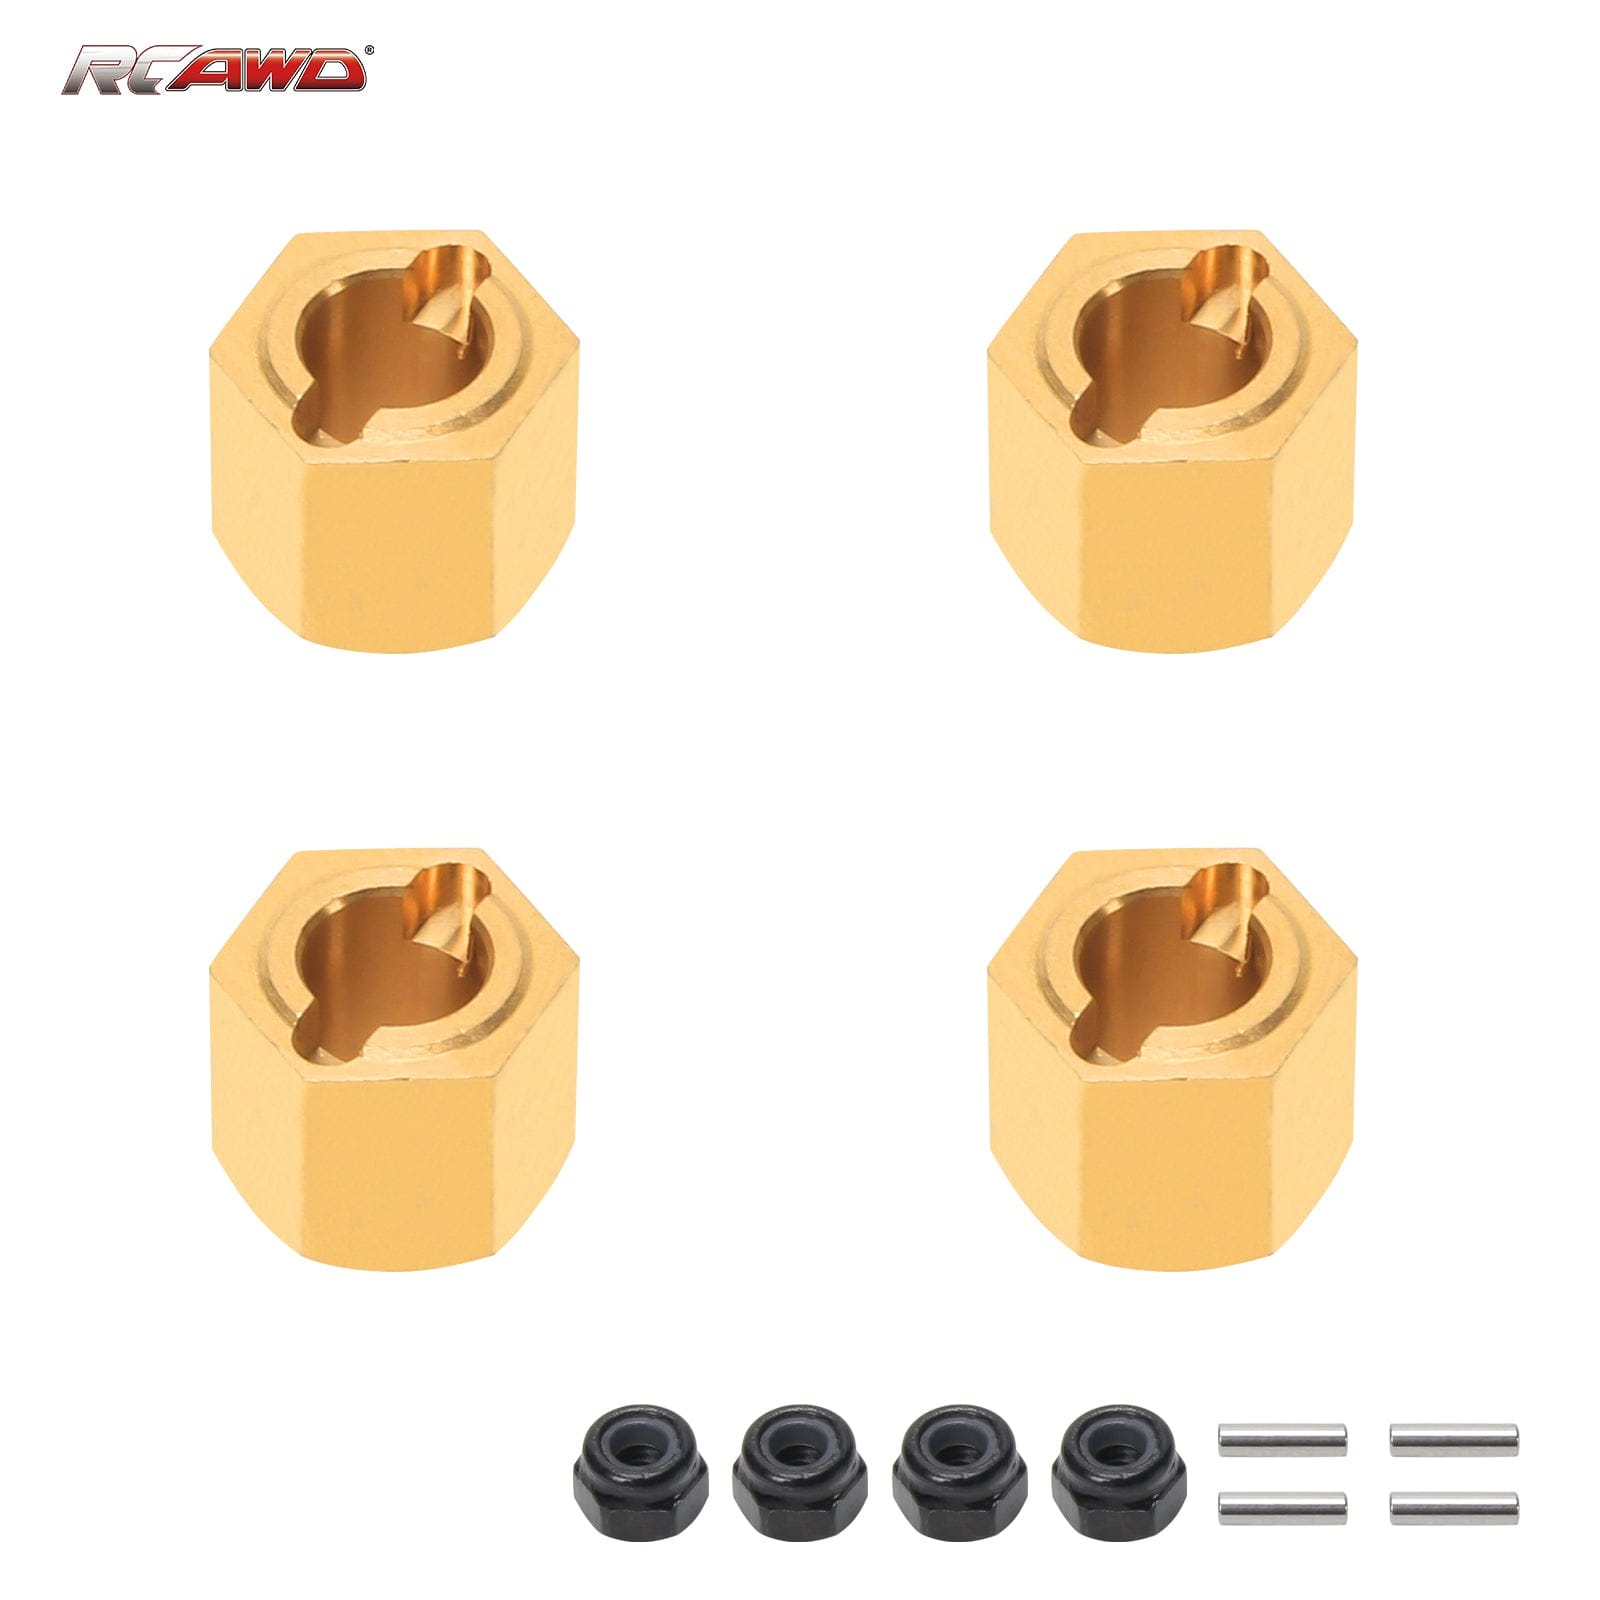 RCAWD FMS FCX24 Thickening 2mm RCAWD FCX24 Upgrade  Full brass wheel hex 4pcs 1.5g